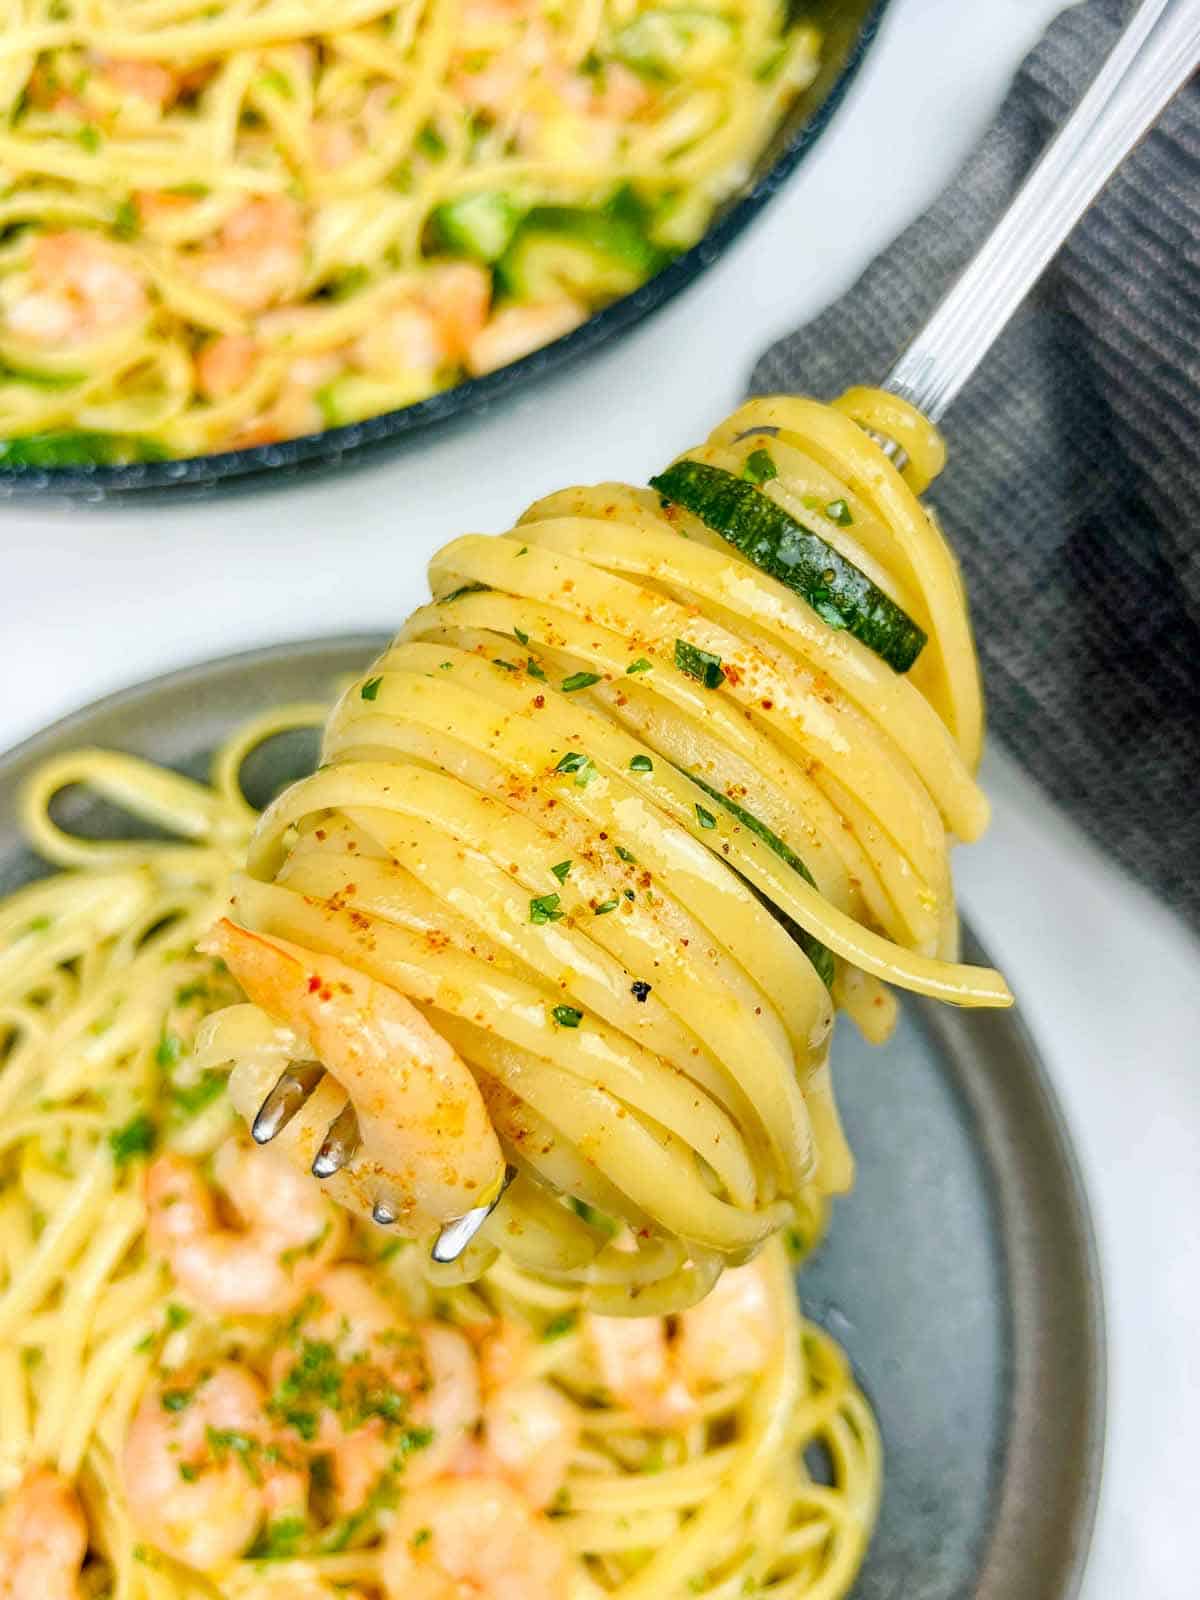 pasta dish : linguine with shrimp and zucchini on a fork. Pasta plate in the background.